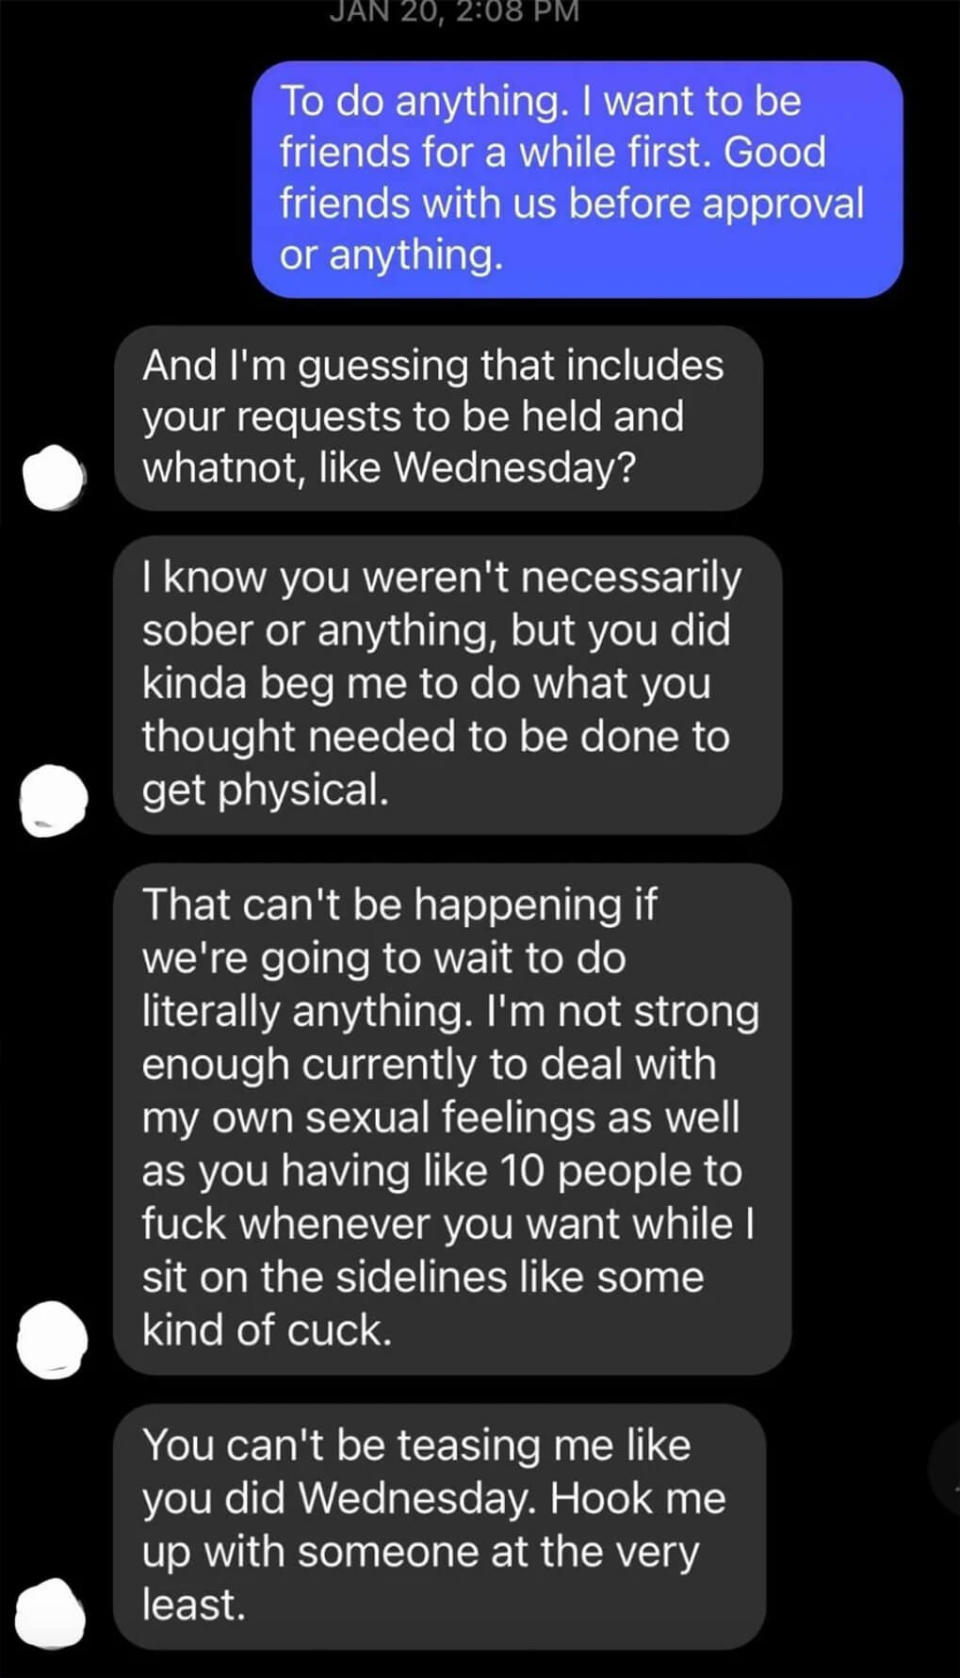 A man tells a woman she can't ask him to cuddle and expect him not to want to do something more, or as he says, "sit on the sidelines like some kind of cuck"